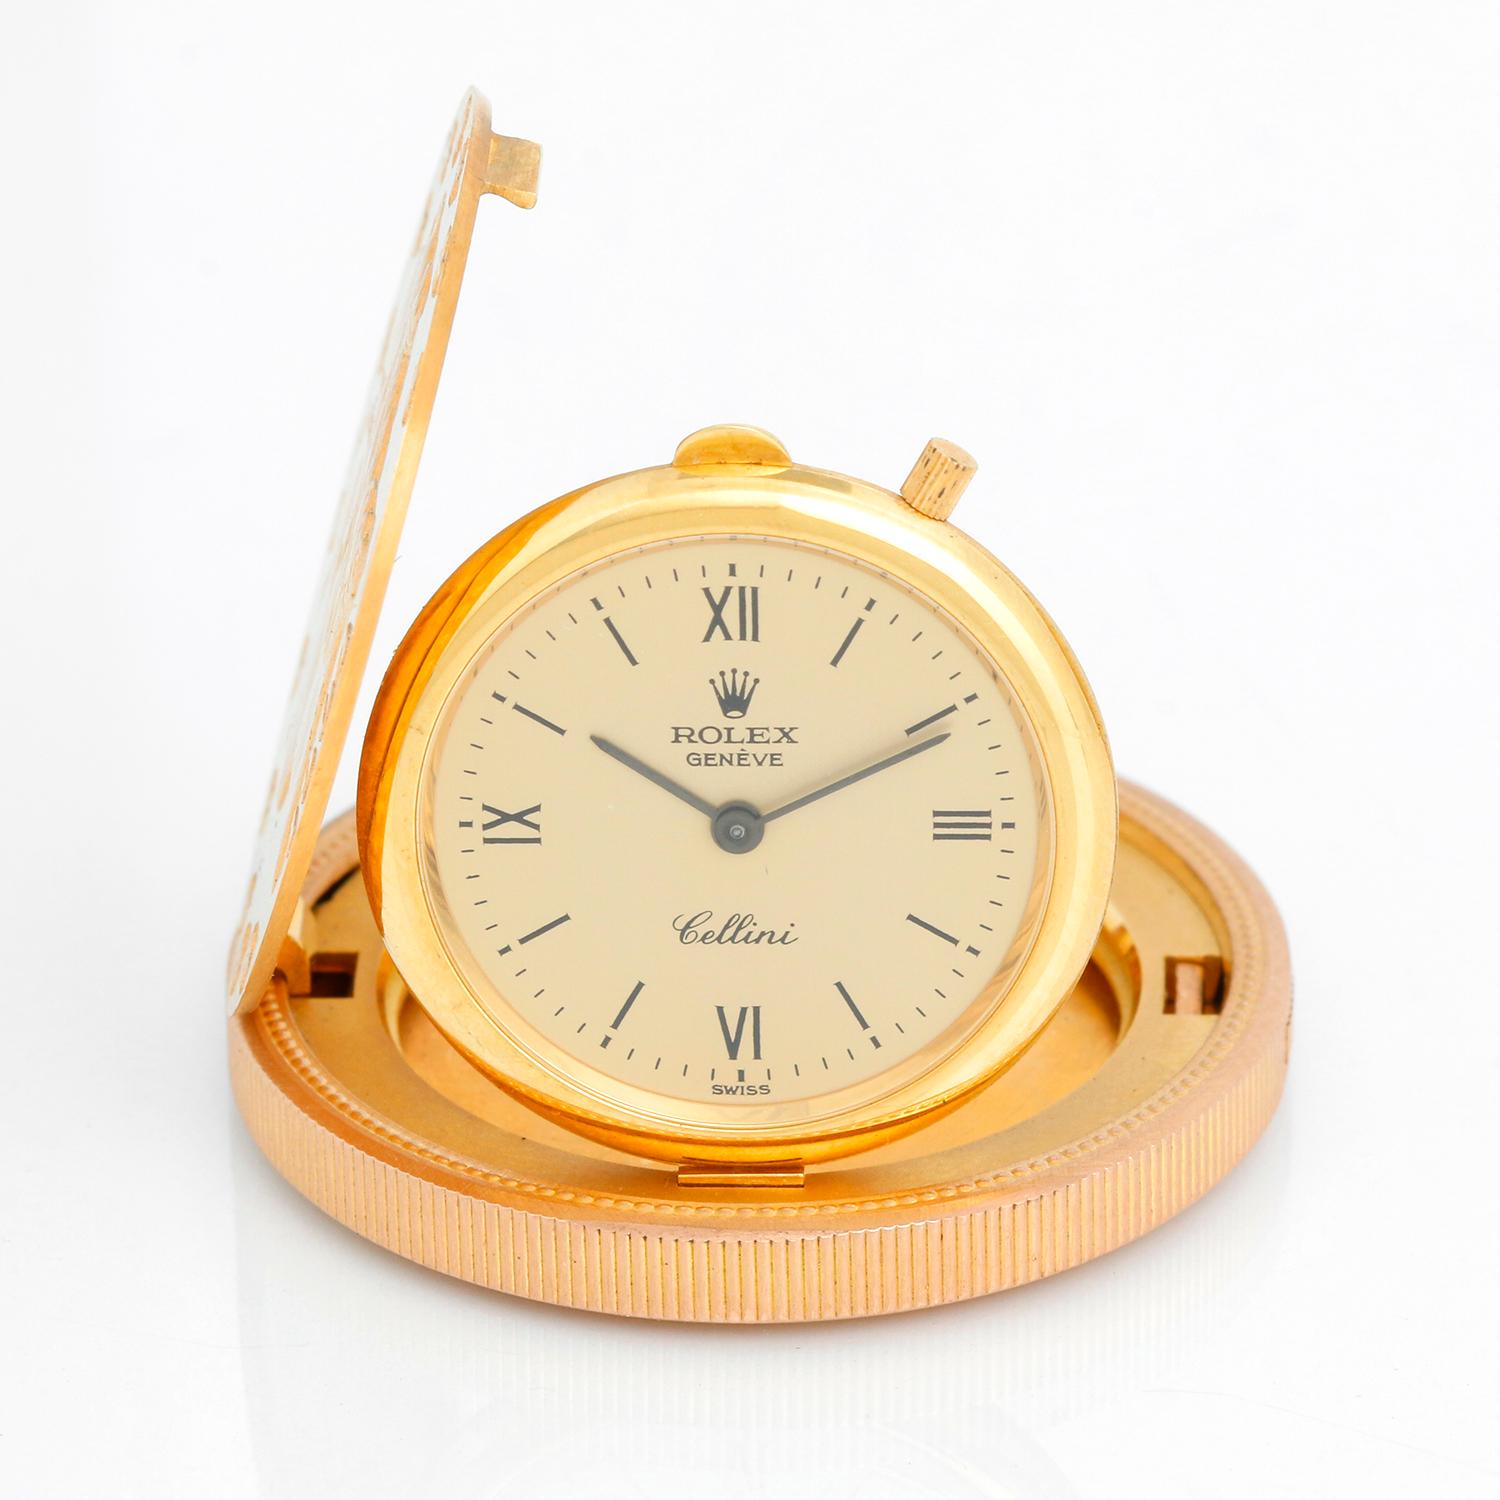 Rolex 18K Yellow Gold Twenty Dollar Coin Watch - Manual winding. 18K Yellow gold coin case ( 34mm). Champagne dial with Roman and Stick hour markers; Signed Rolex Geneve Cellini. Pre-owned Rolex box and book. Very rare and collectable .